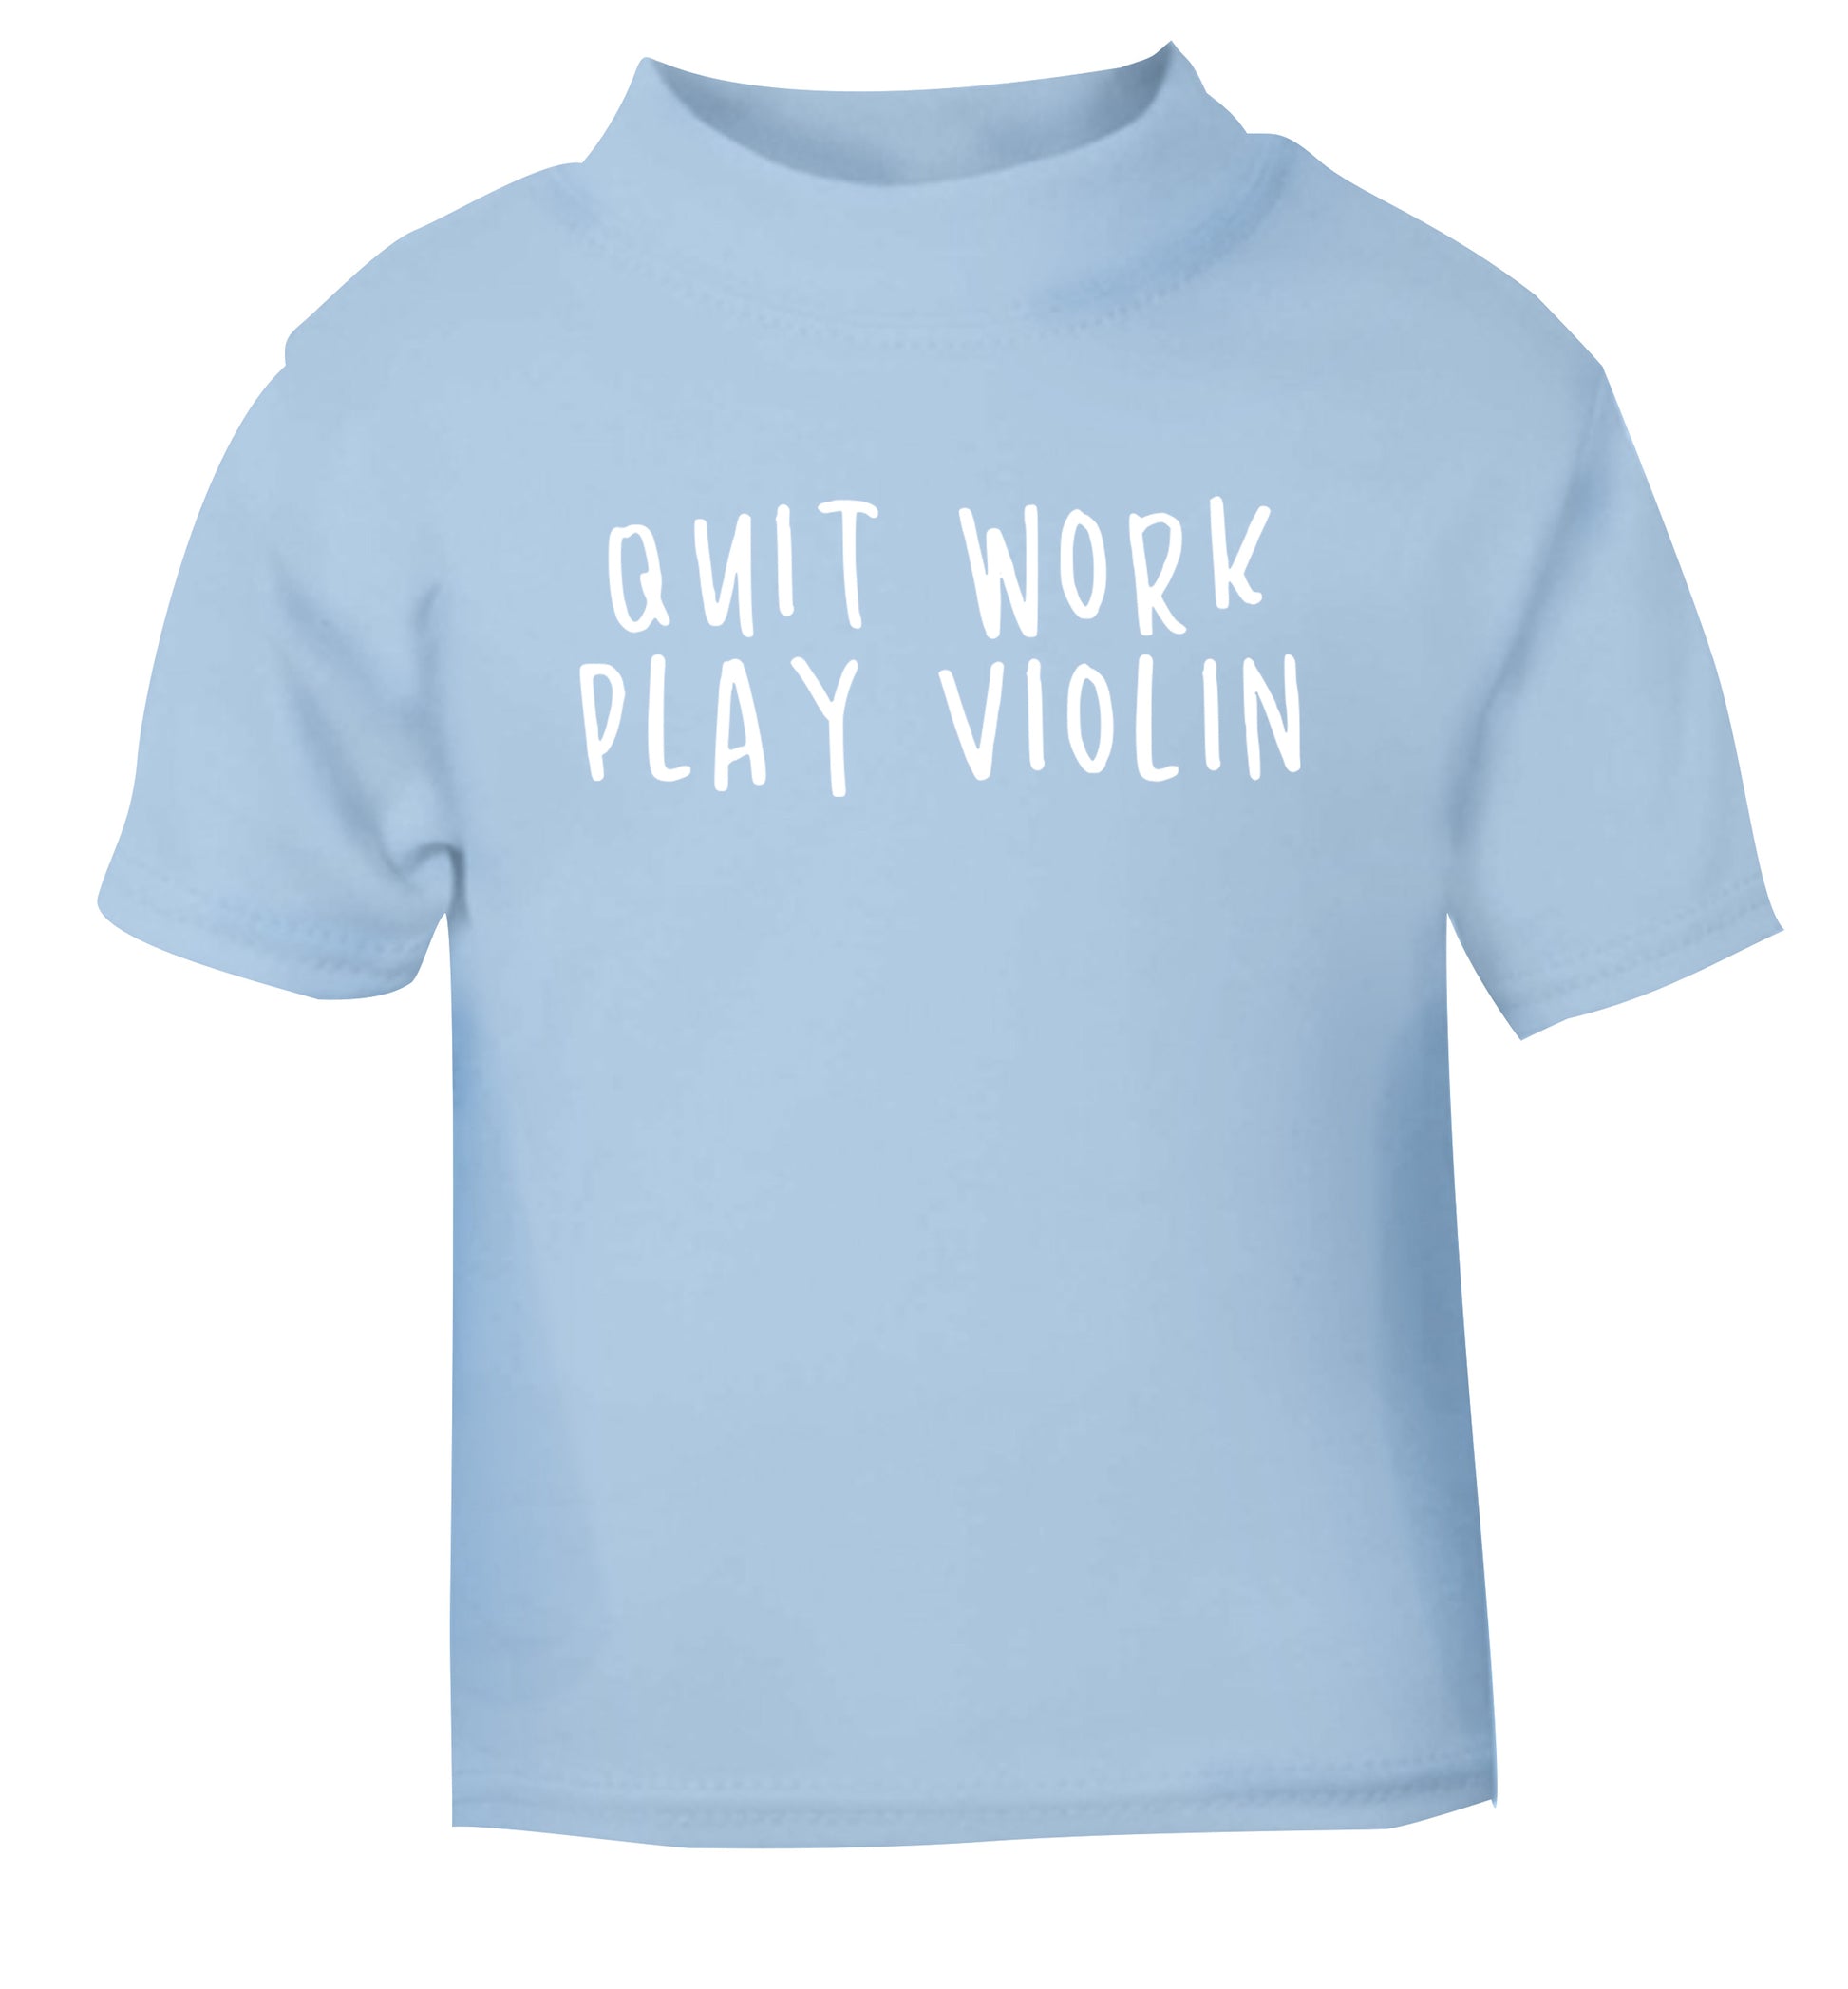 Quit work play violin light blue Baby Toddler Tshirt 2 Years